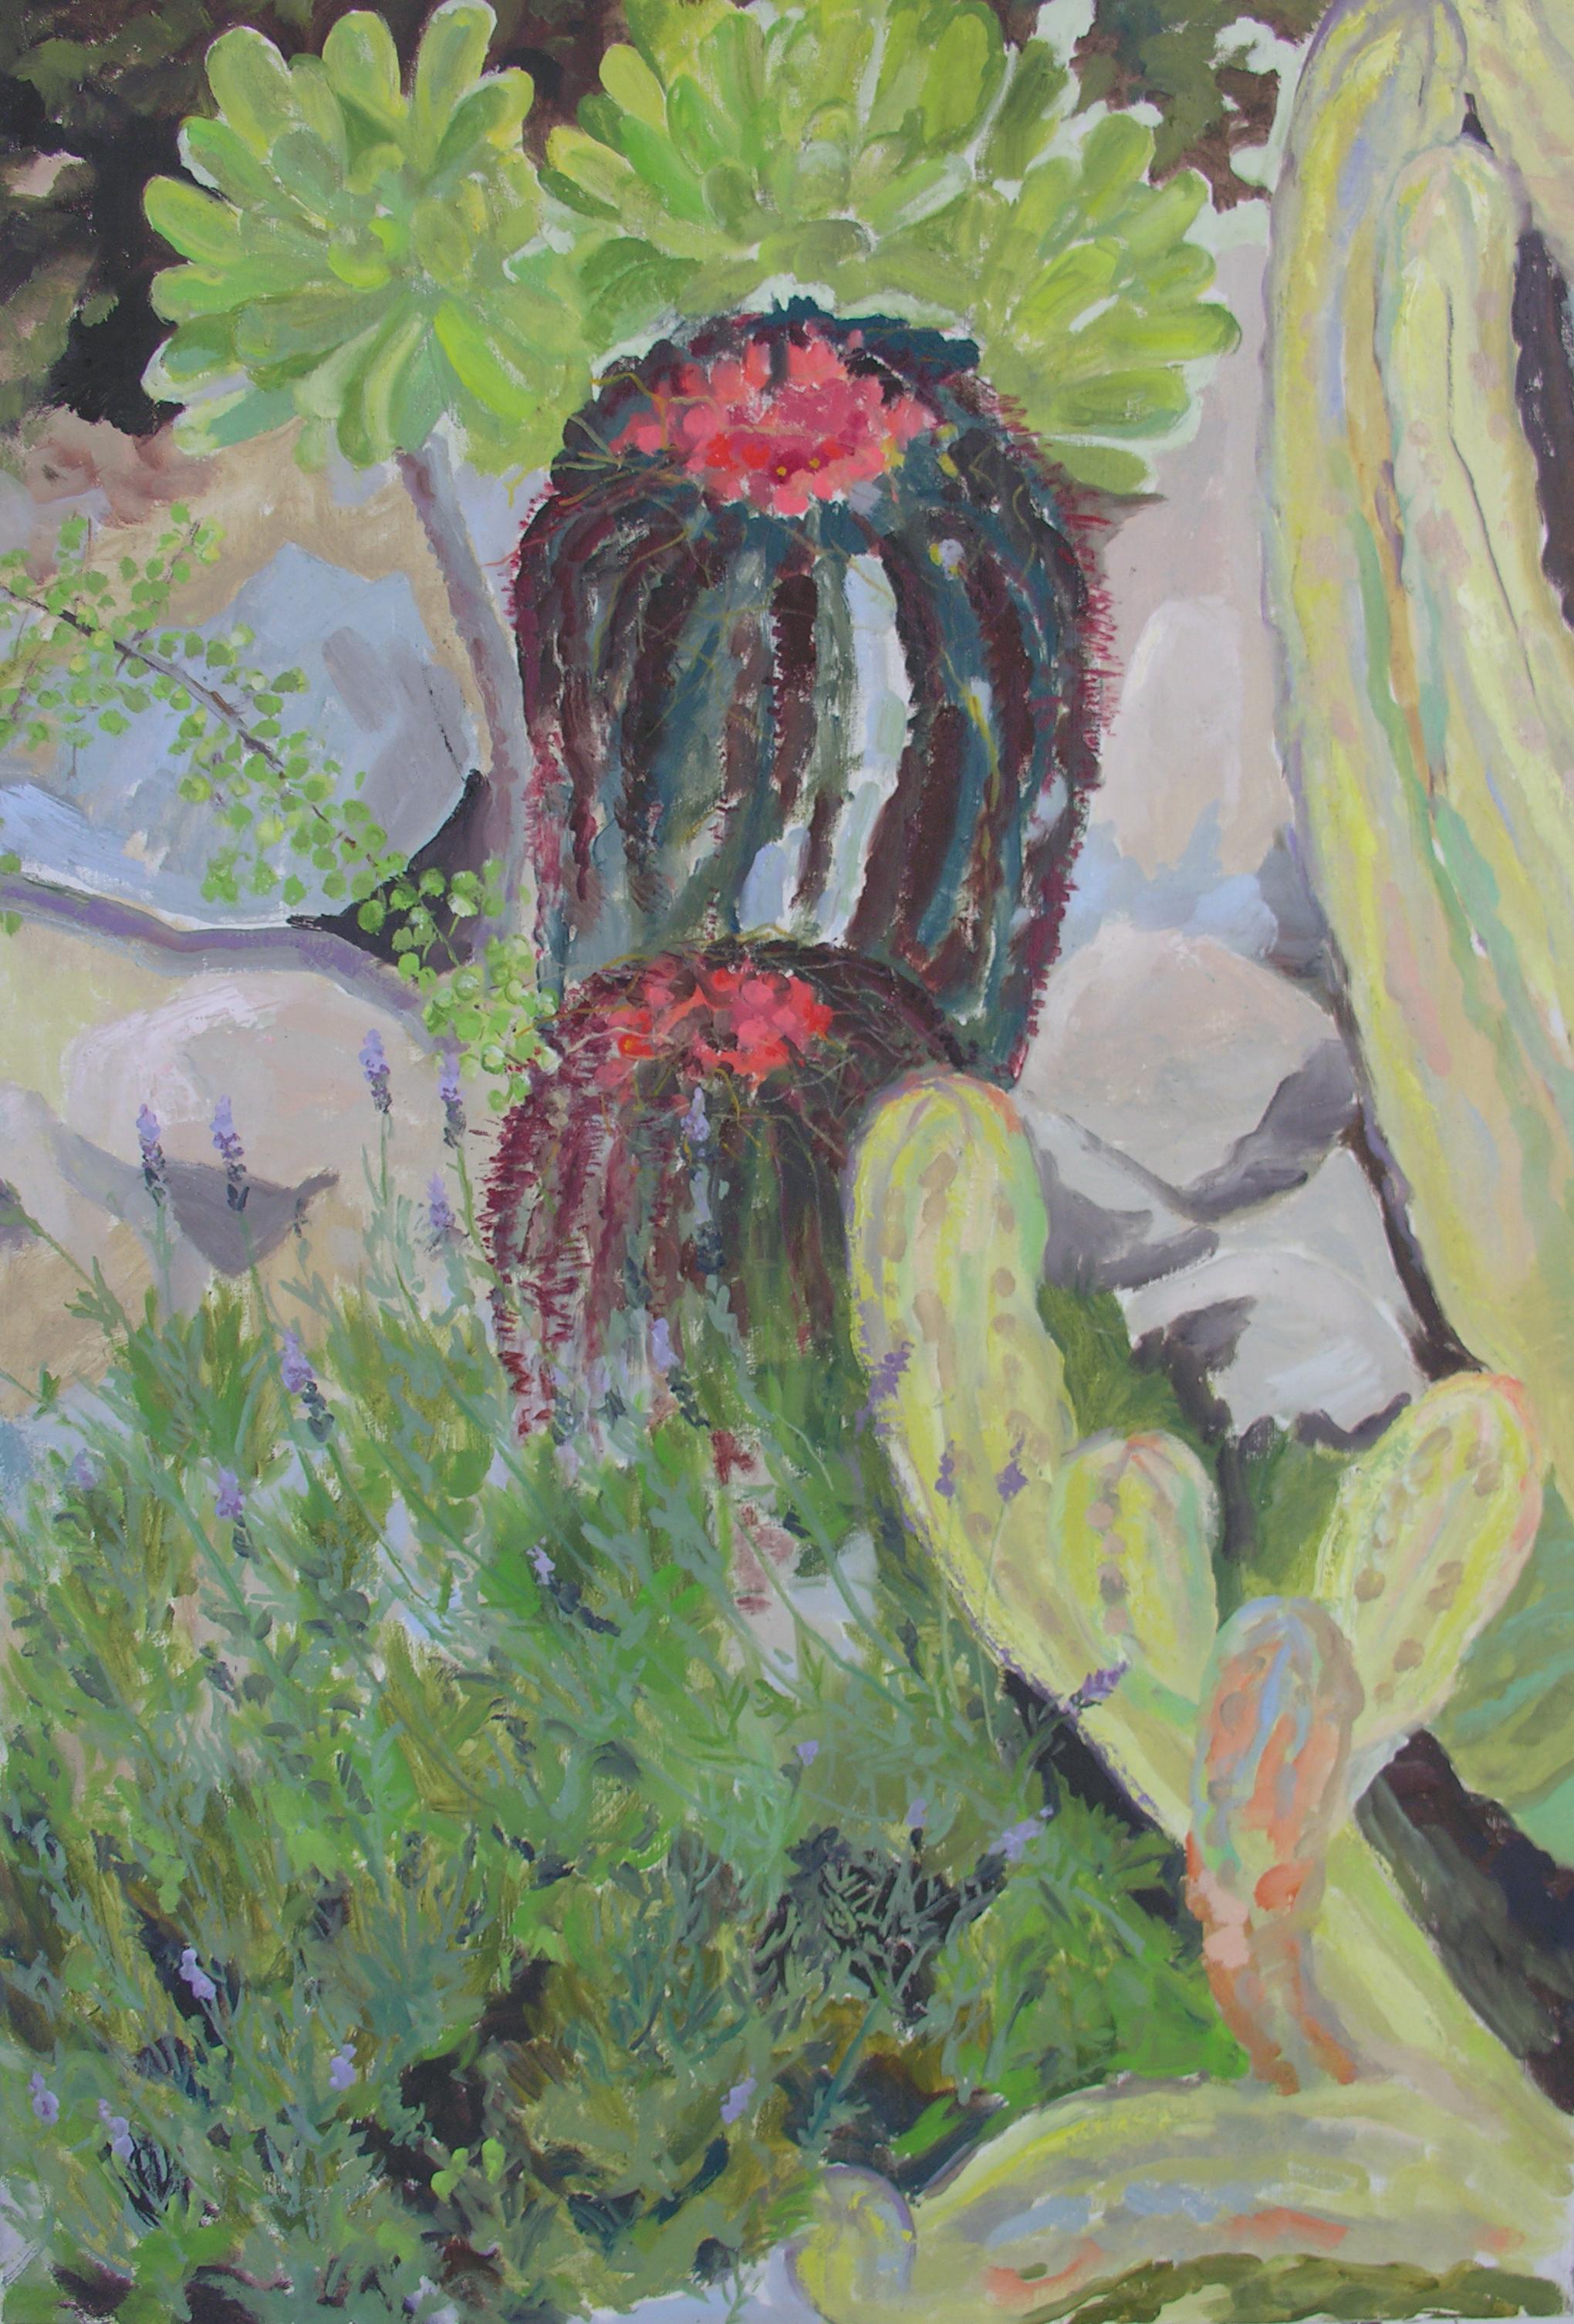   Contemporary Oil Plant/Cactus painting green, violet, yellow Mediterranean

This painting was done on site at the Hanbury Gardens, Italy just over the border from France on the Mediterranean.  I was in residency there for 2.5 months during the